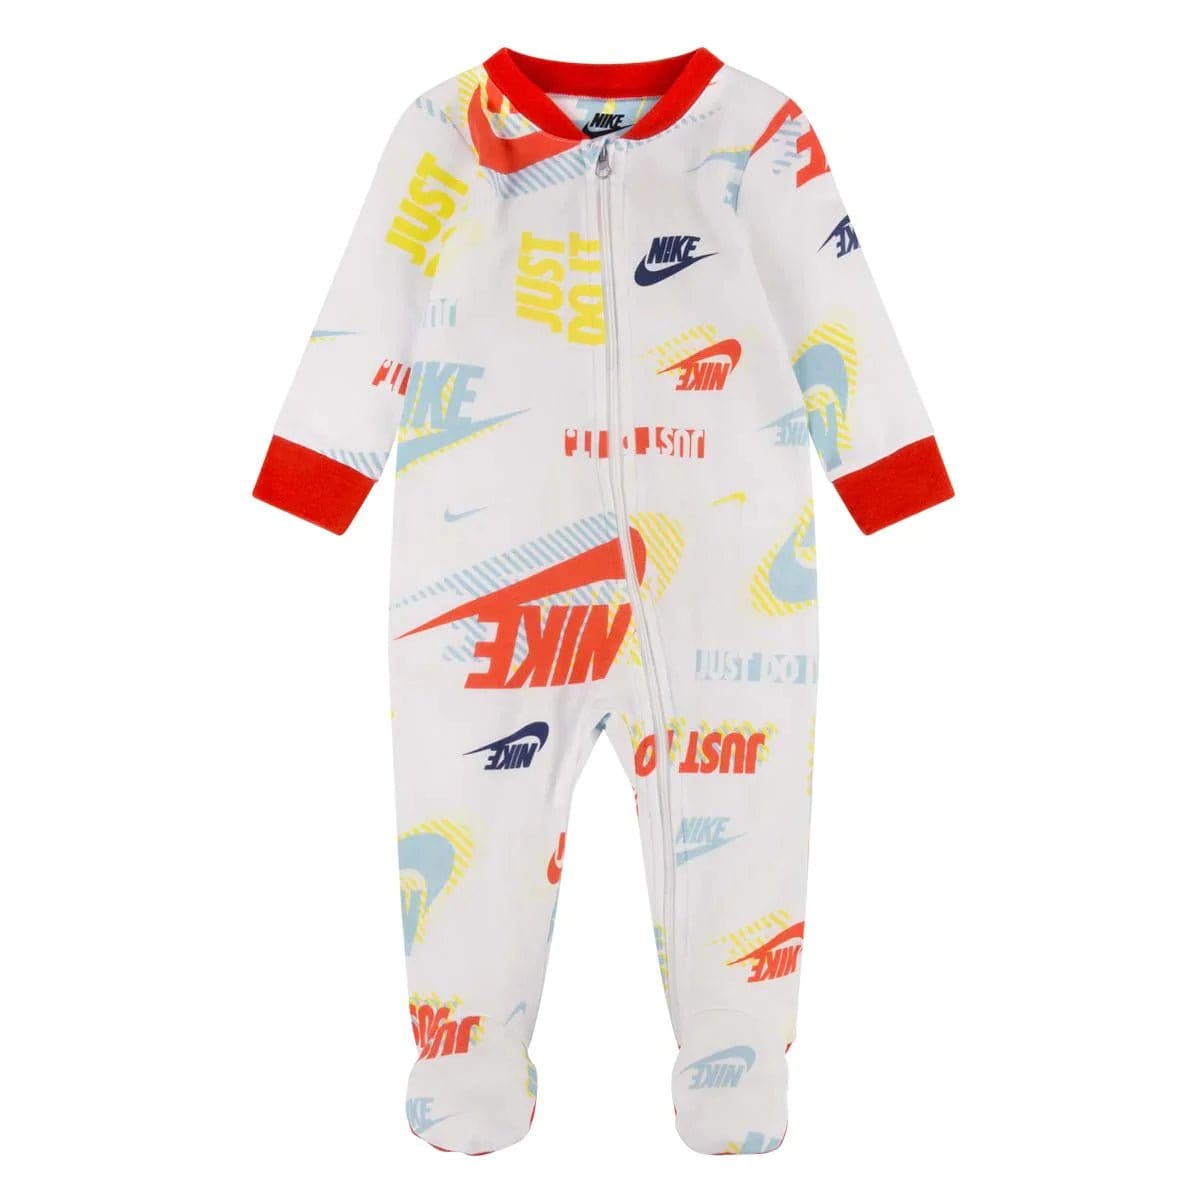 Nike NIKE INFANT'S ACTIVE JOY FOOTED COVERALL WHITE ONESIE - INSPORT